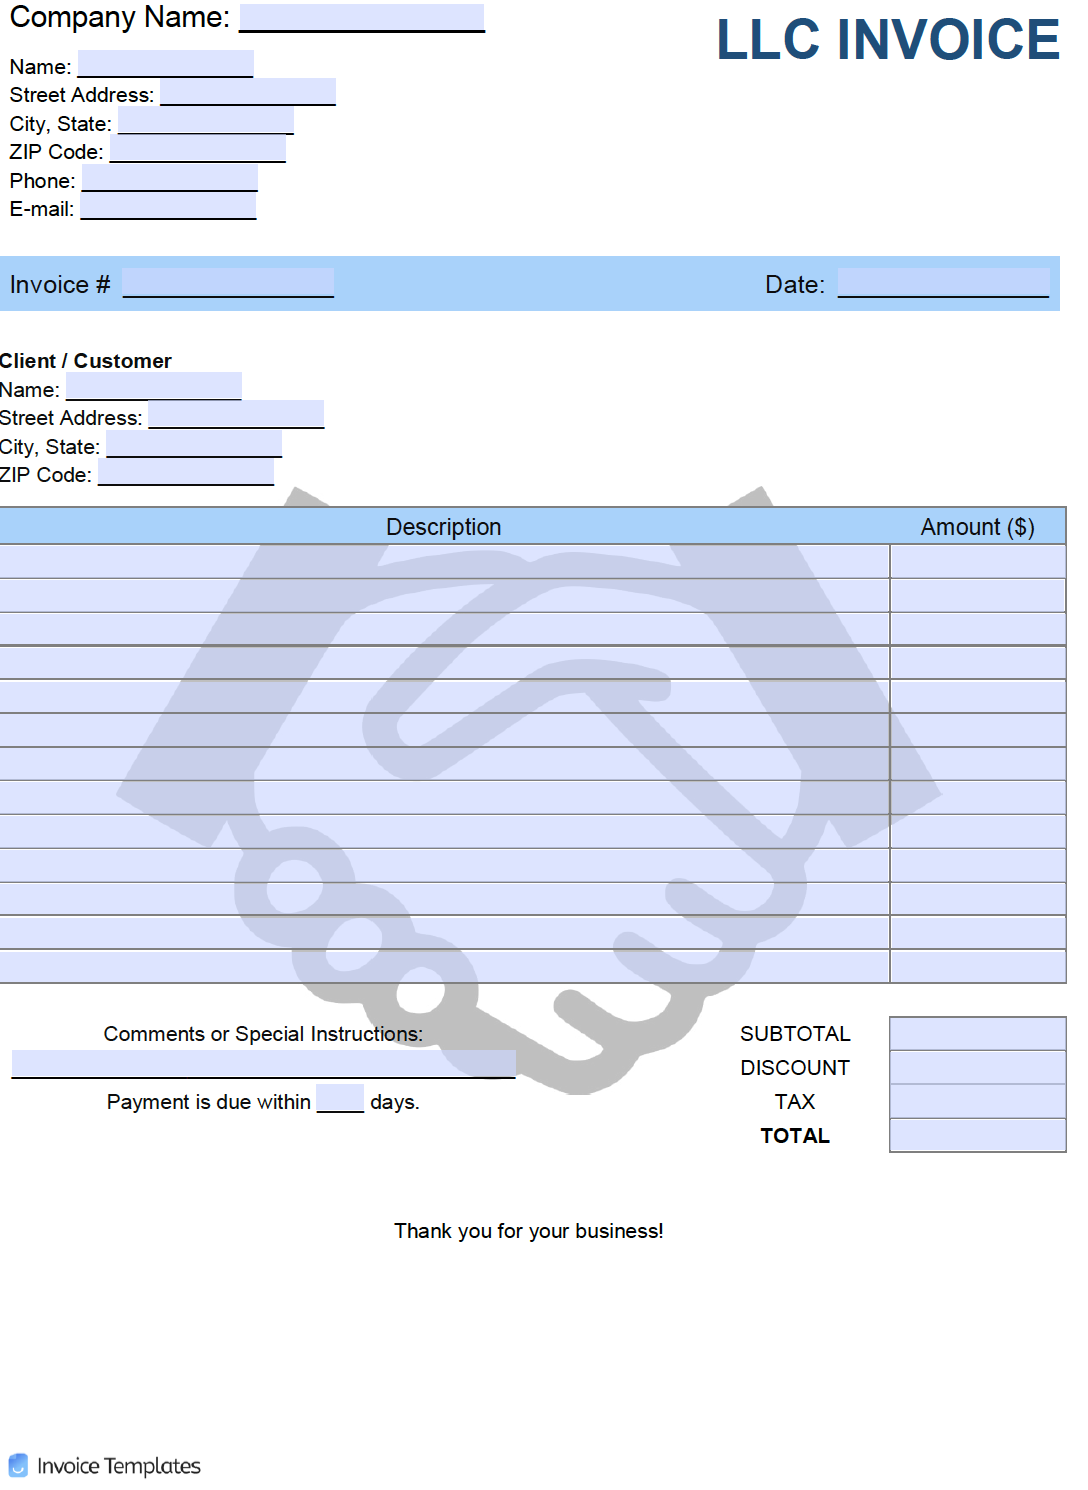 Free Limited Liability Company (LLC) Invoice Template  PDF  WORD With Moving Company Invoice Template Free